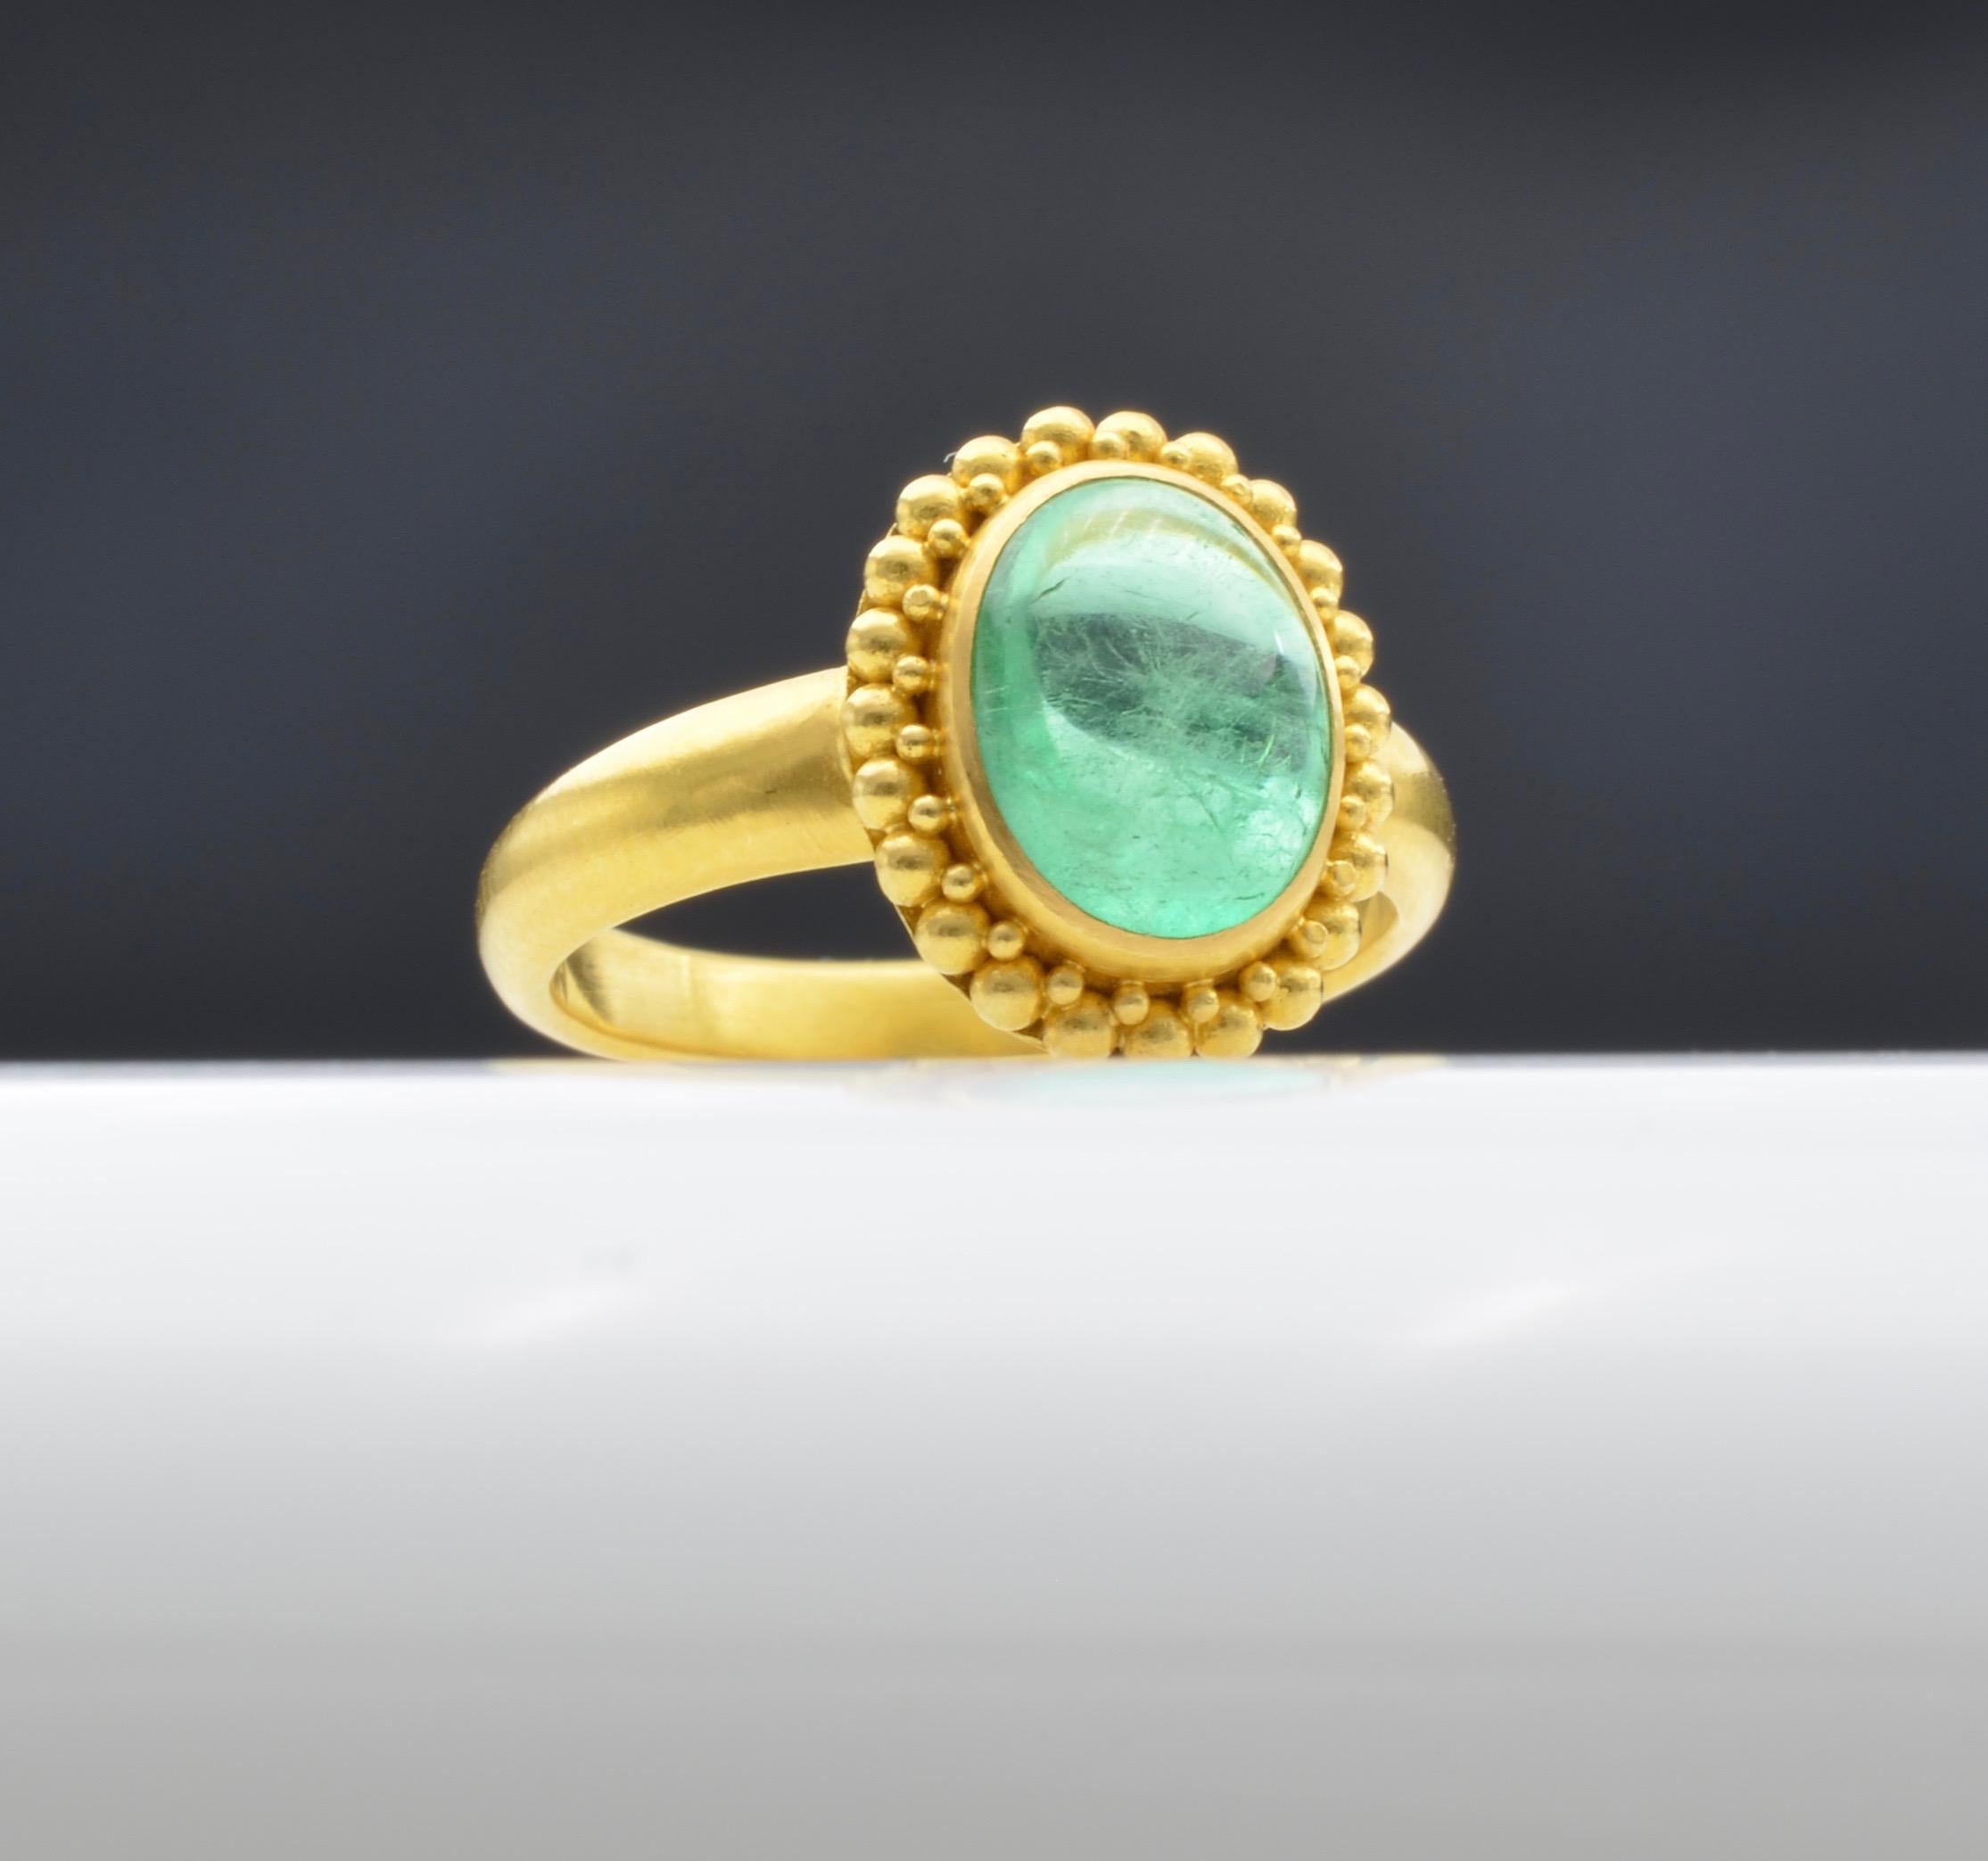 This stunning  approximately  2.80 ct emerald is watery and radiant set in 22k gold to accent the lovely green hue. The ring is a size 6 1/4 and can be sized to fit your finger.